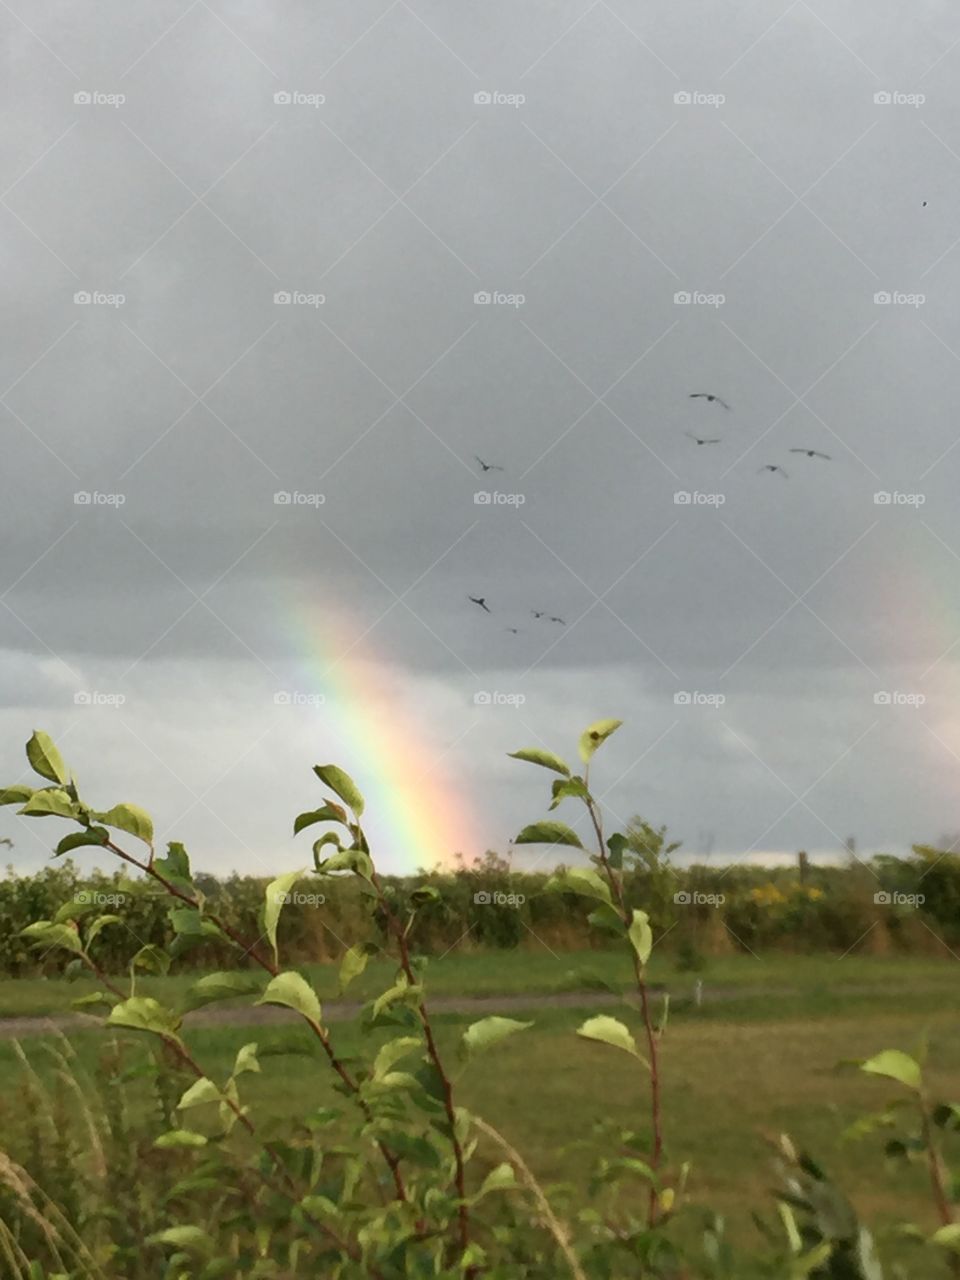 After the storm a stunning double rainbow appears geese’s take Flight isn’t-nature grand .